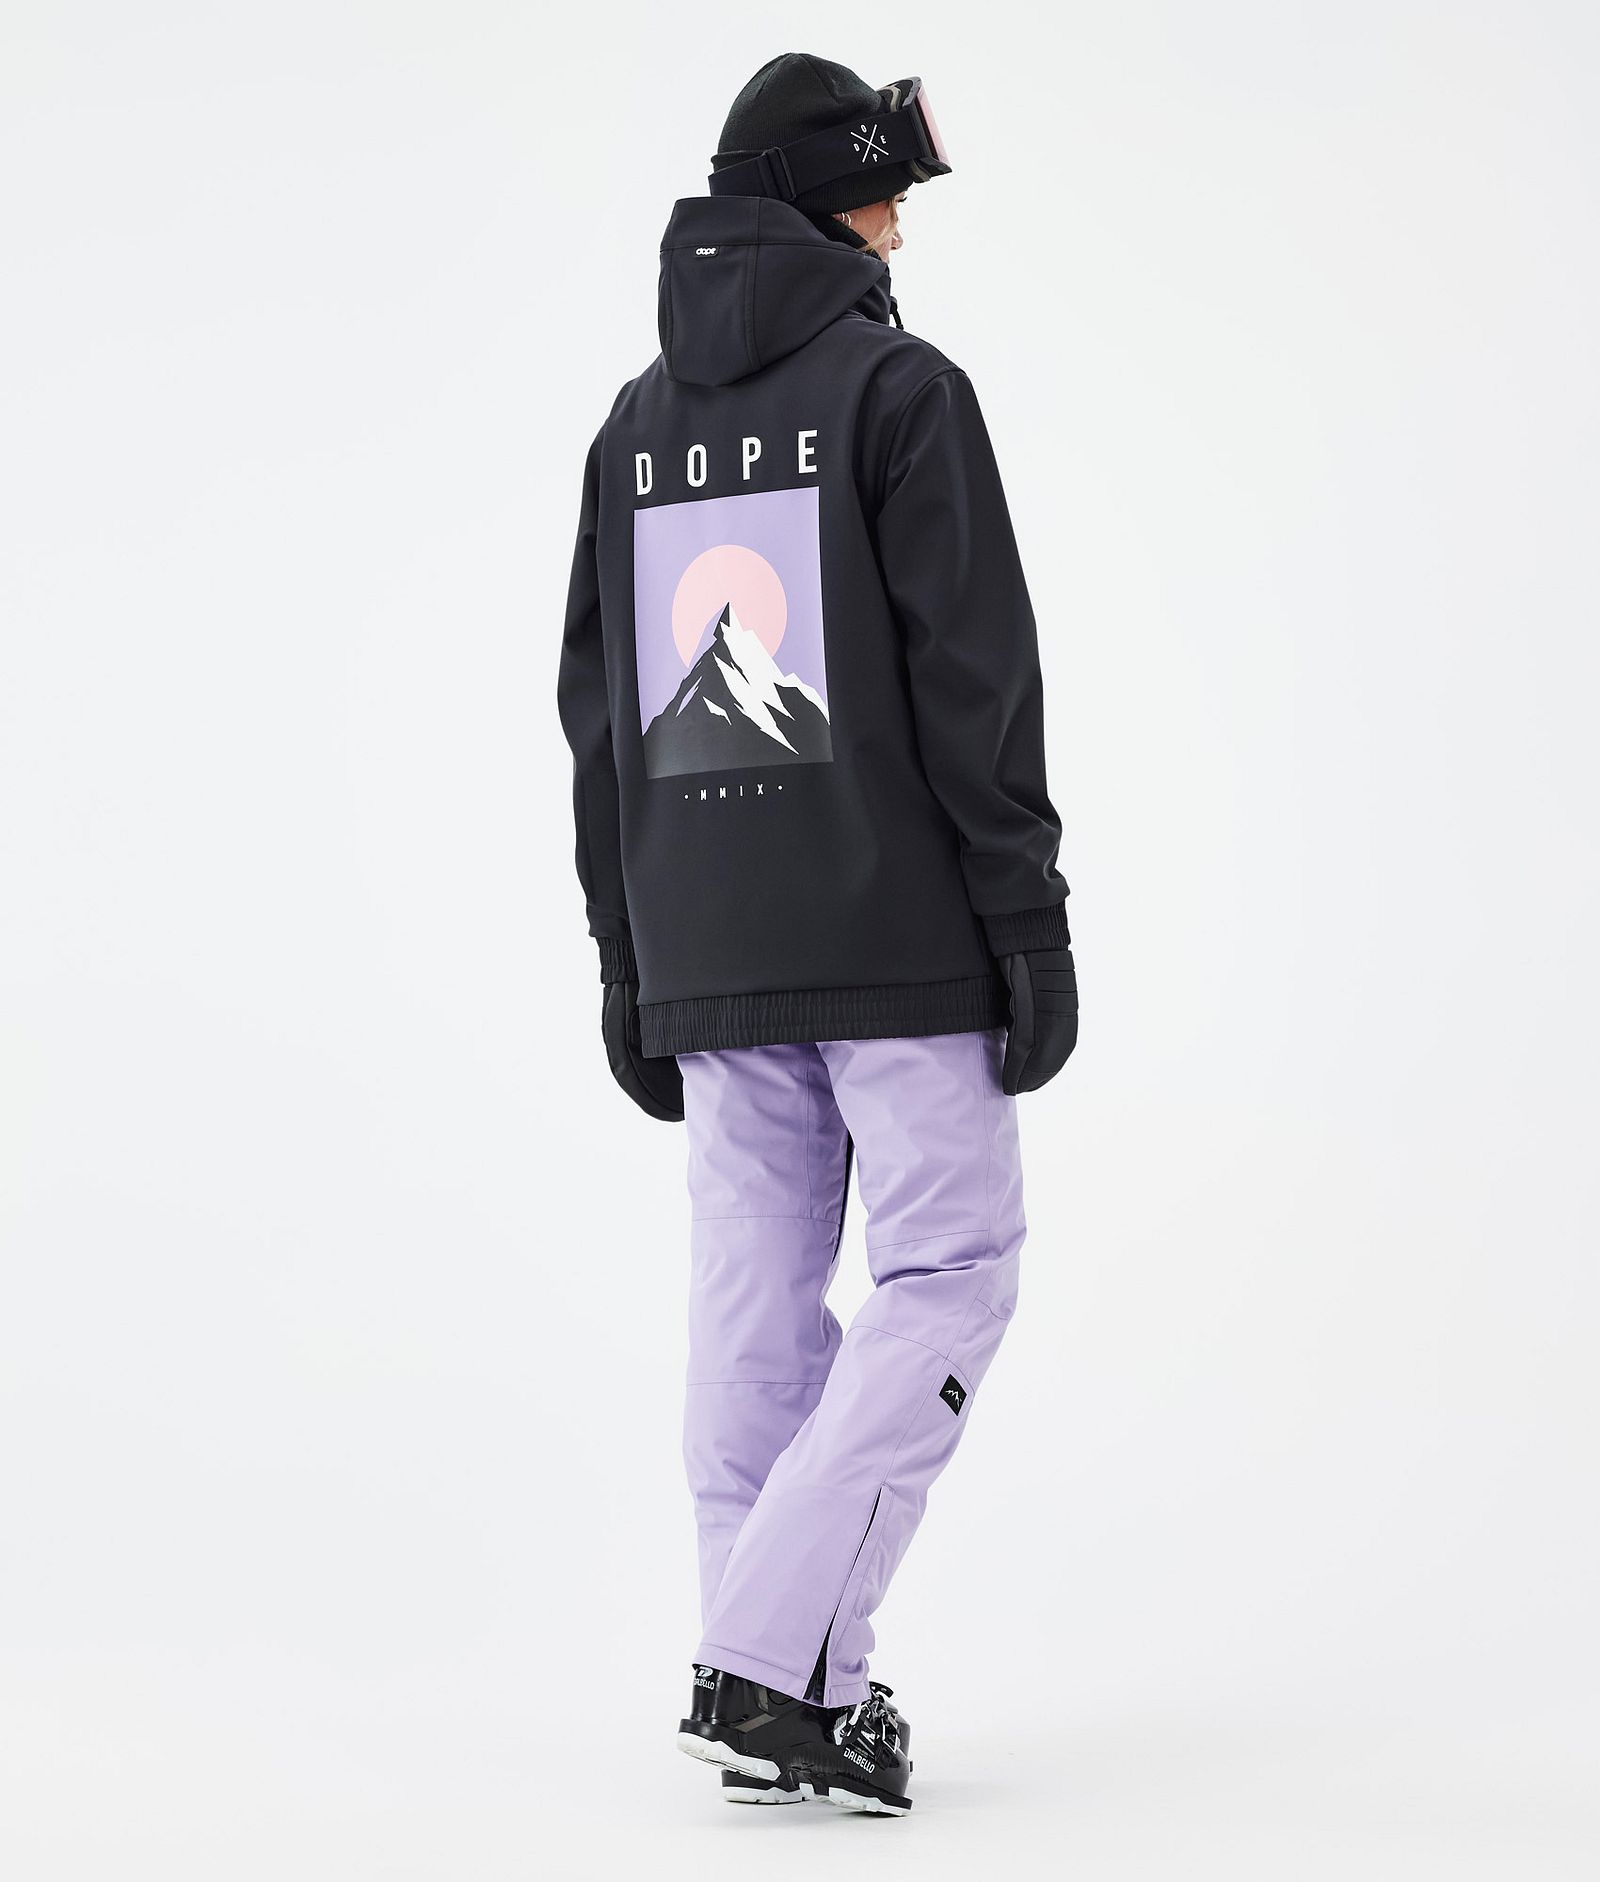 Dope Yeti W Skidoutfit Dame Black/Faded Violet